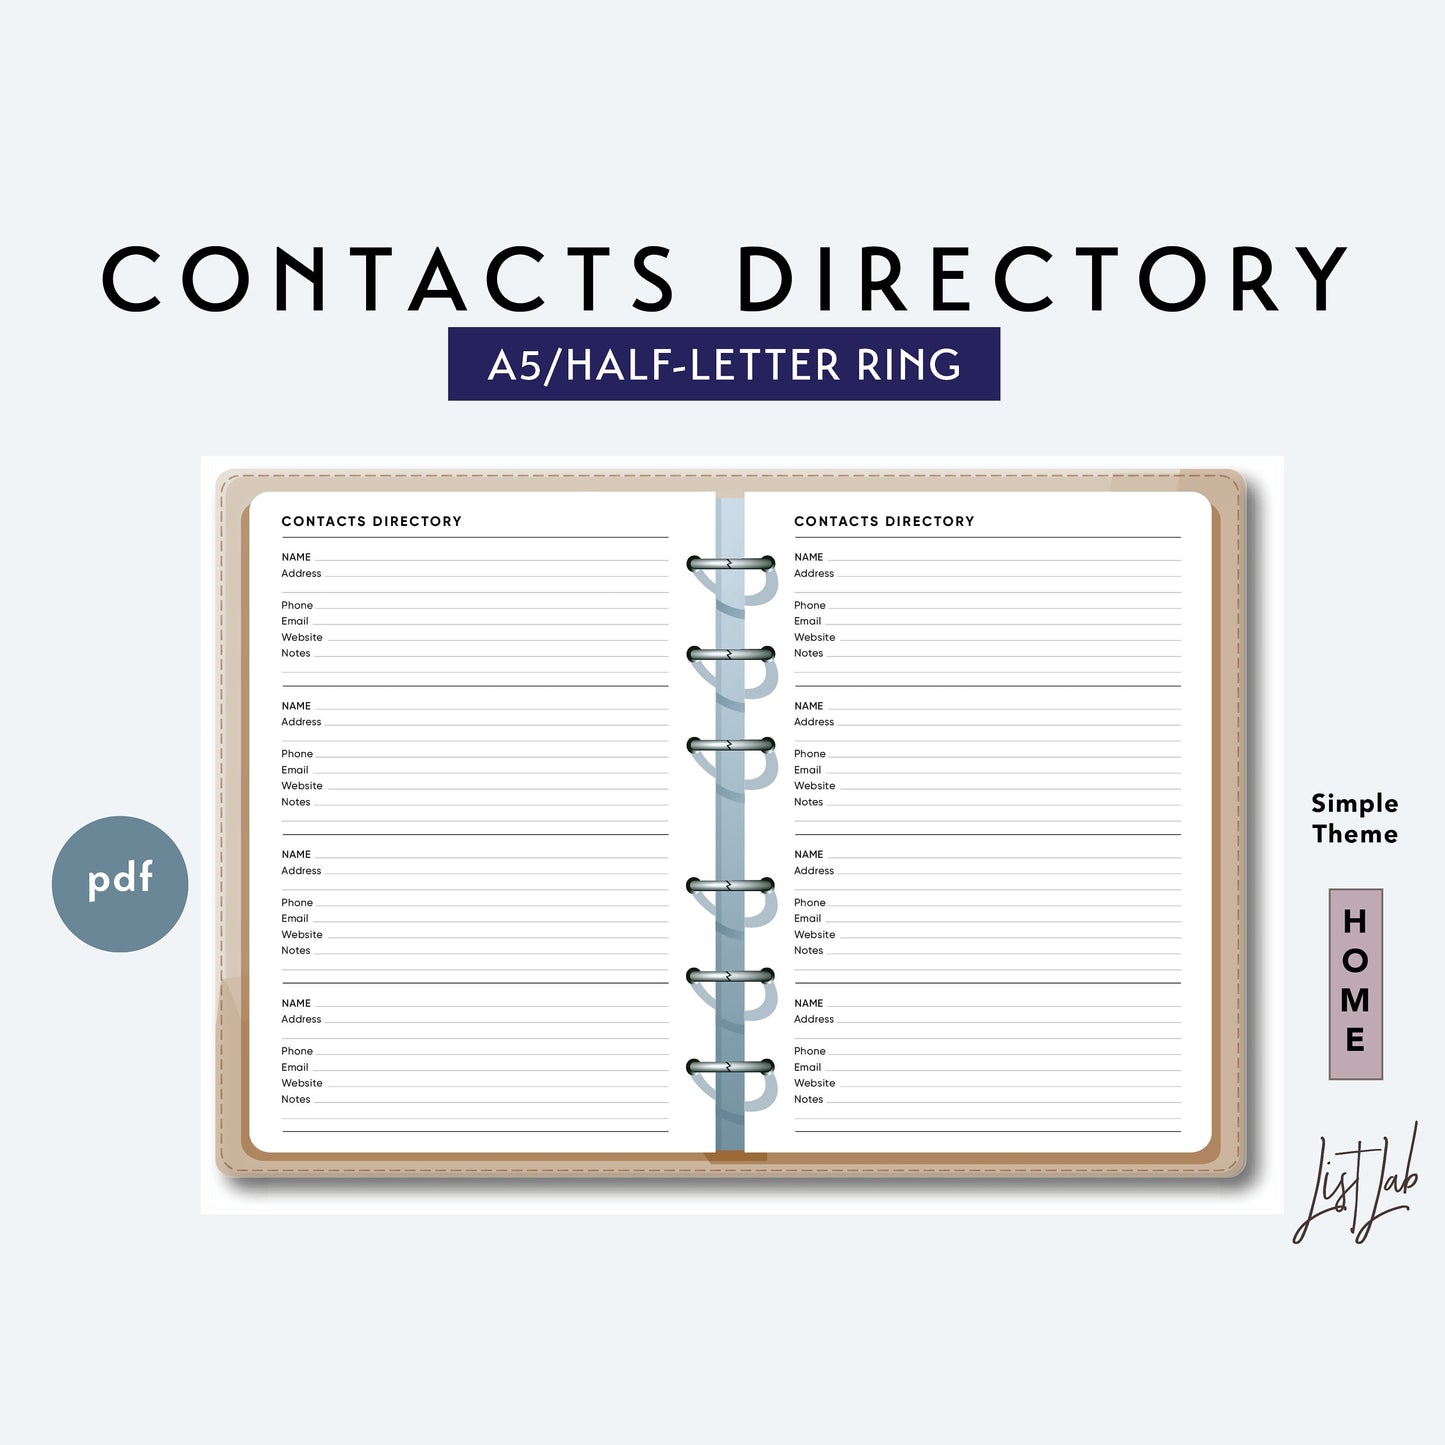 A5 / Half-Letter Ring CONTACTS DIRECTORY Printable Set